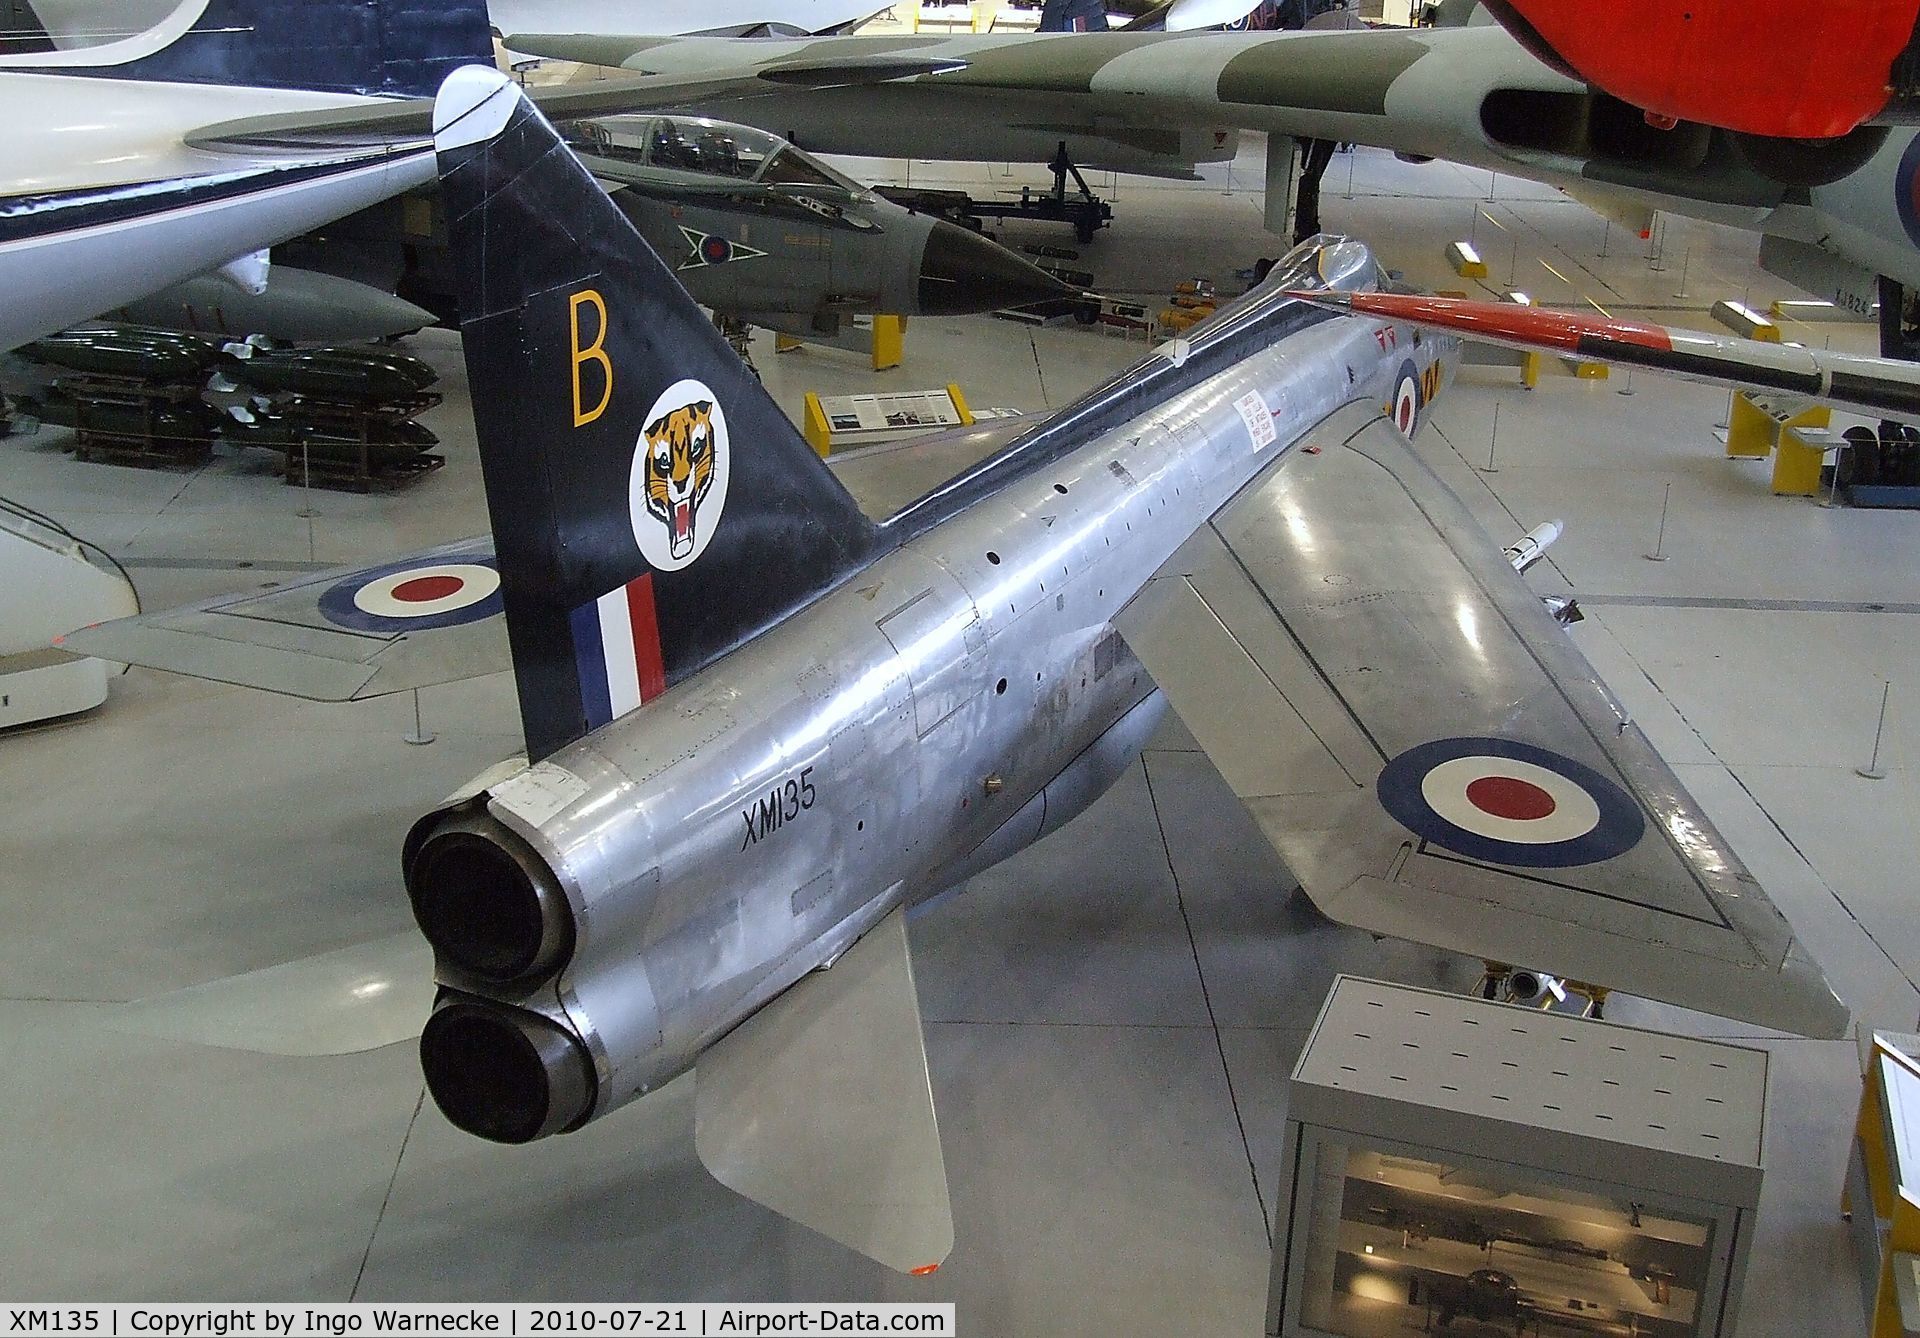 XM135, 1959 English Electric Lightning F.1 C/N 95031, English Electric Lightning F1 at the Imperial War Museum, Duxford